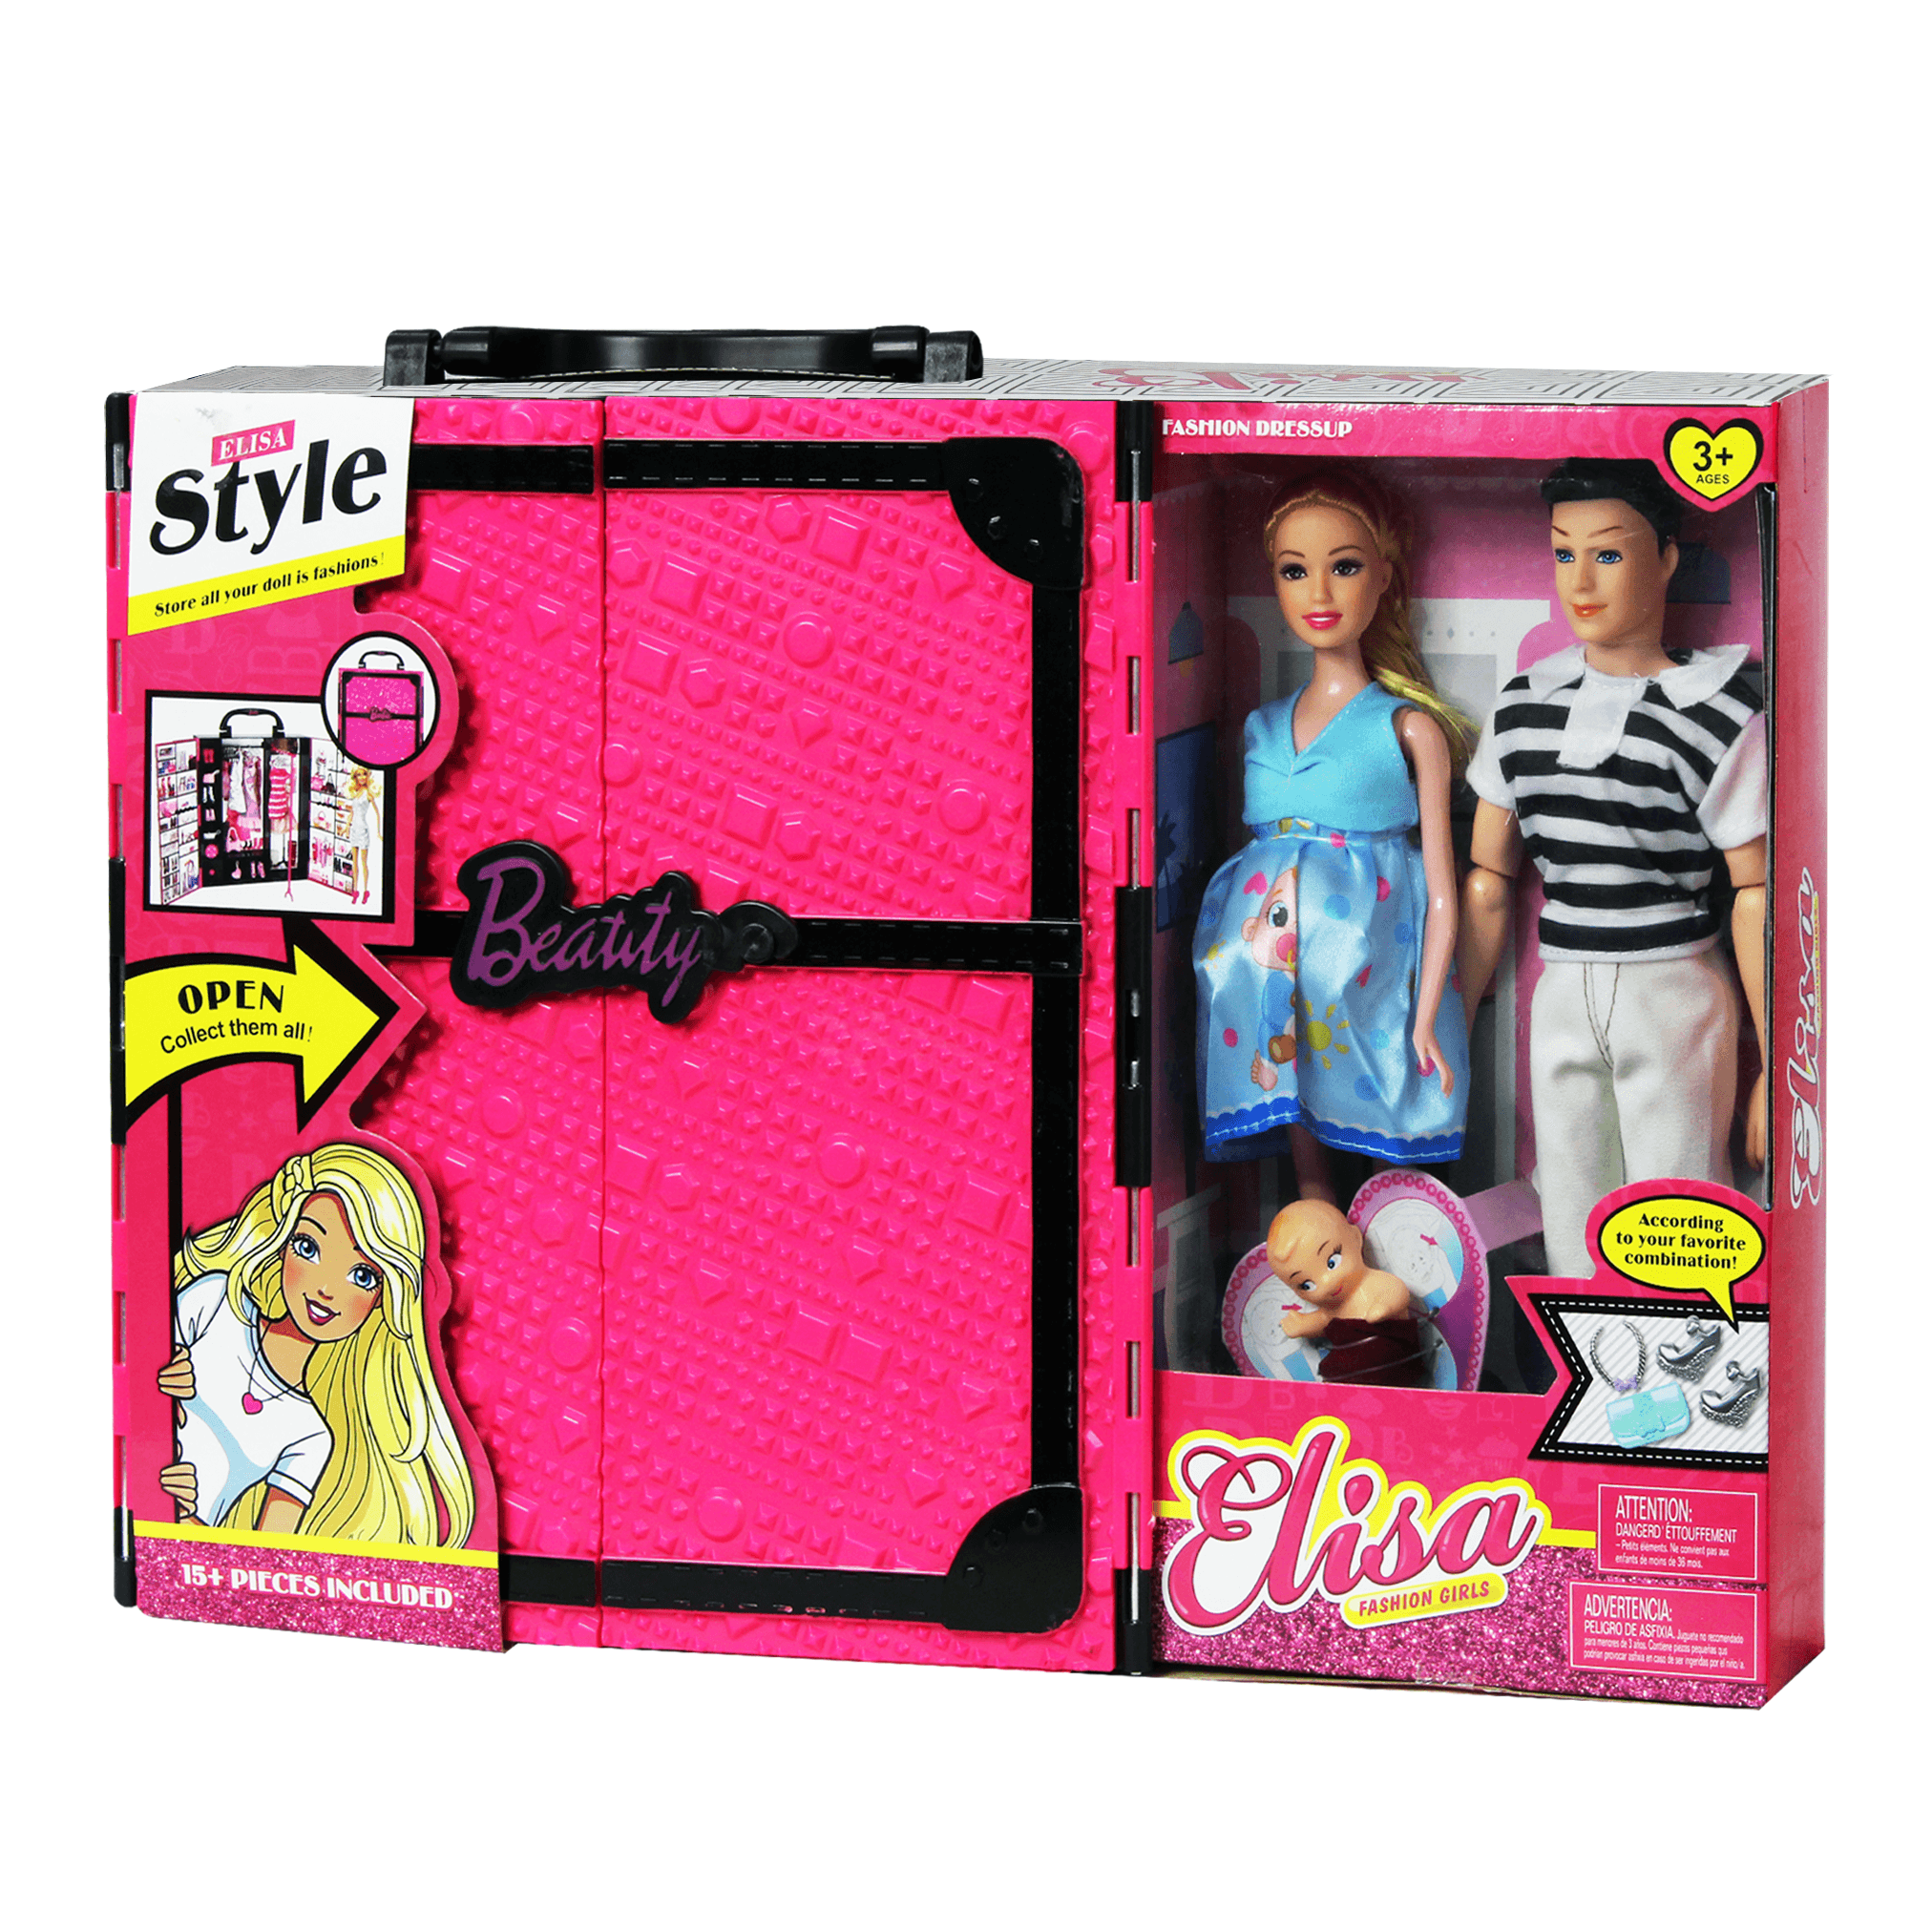 Elisa Fashion Style Store is All Your Doll Fashion - 15 pcs - BumbleToys - 2-4 Years, 3+ years, 4+ Years, 5-7 Years, Dolls, Fashion Dolls & Accessories, Girls, Toy Land